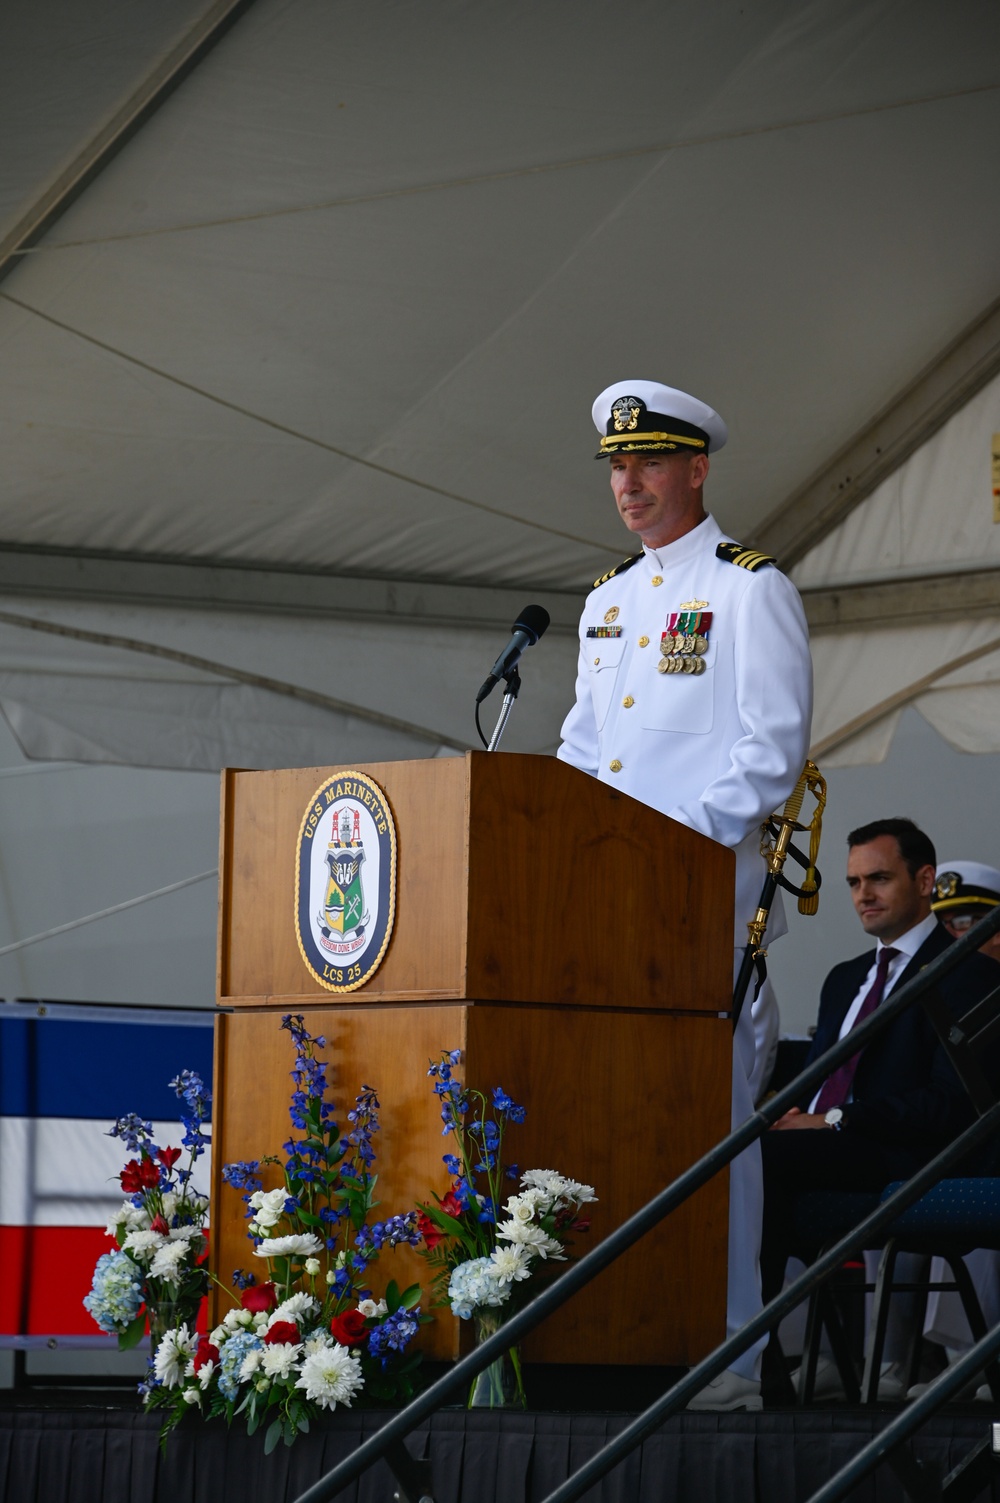 USS Marinette Commissions the Wright Way